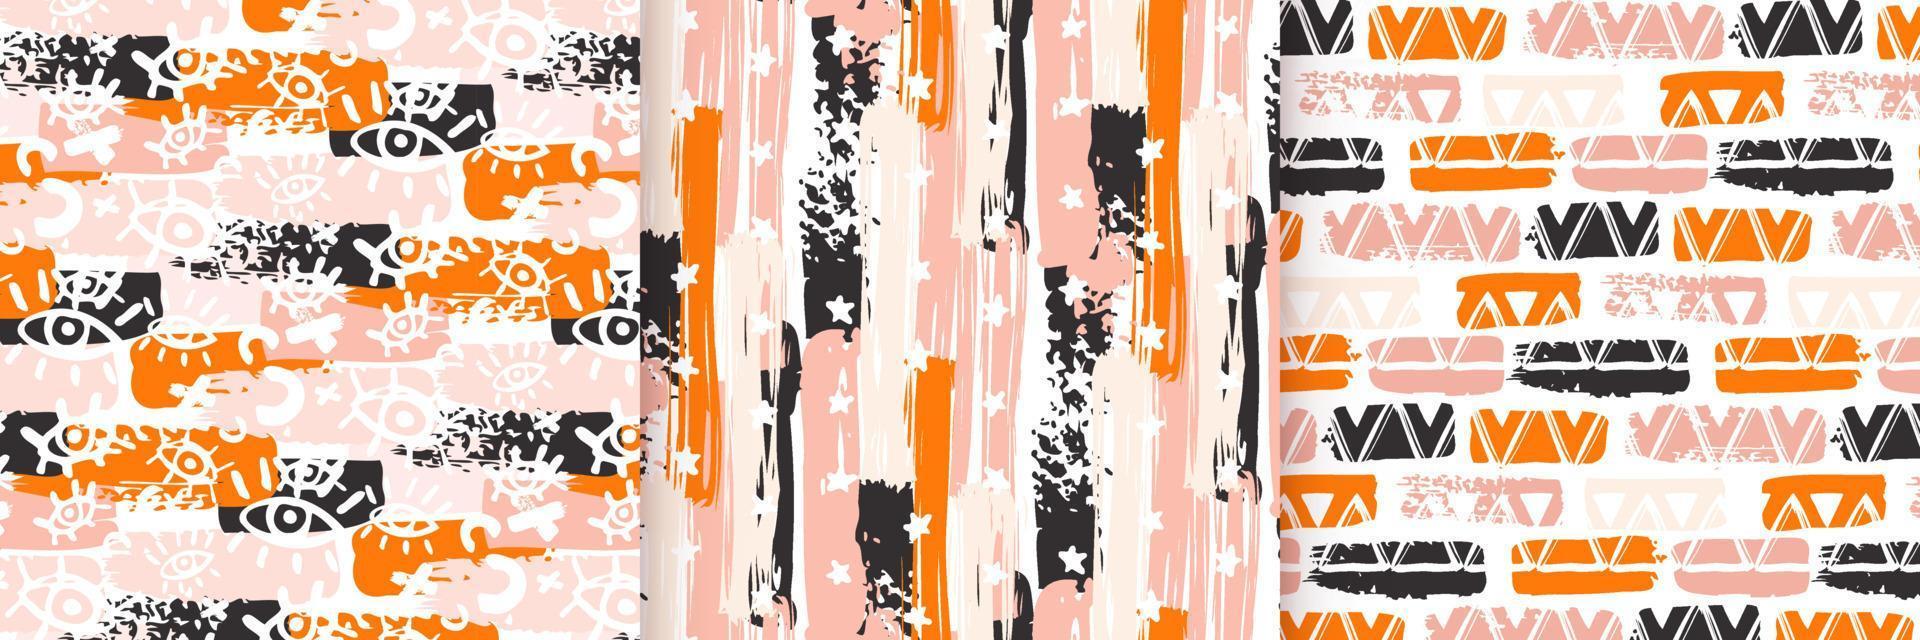 Abstract seamless patterns with brush stroke and marker. Hand drawn doodle shapes, marks and lines. Vector